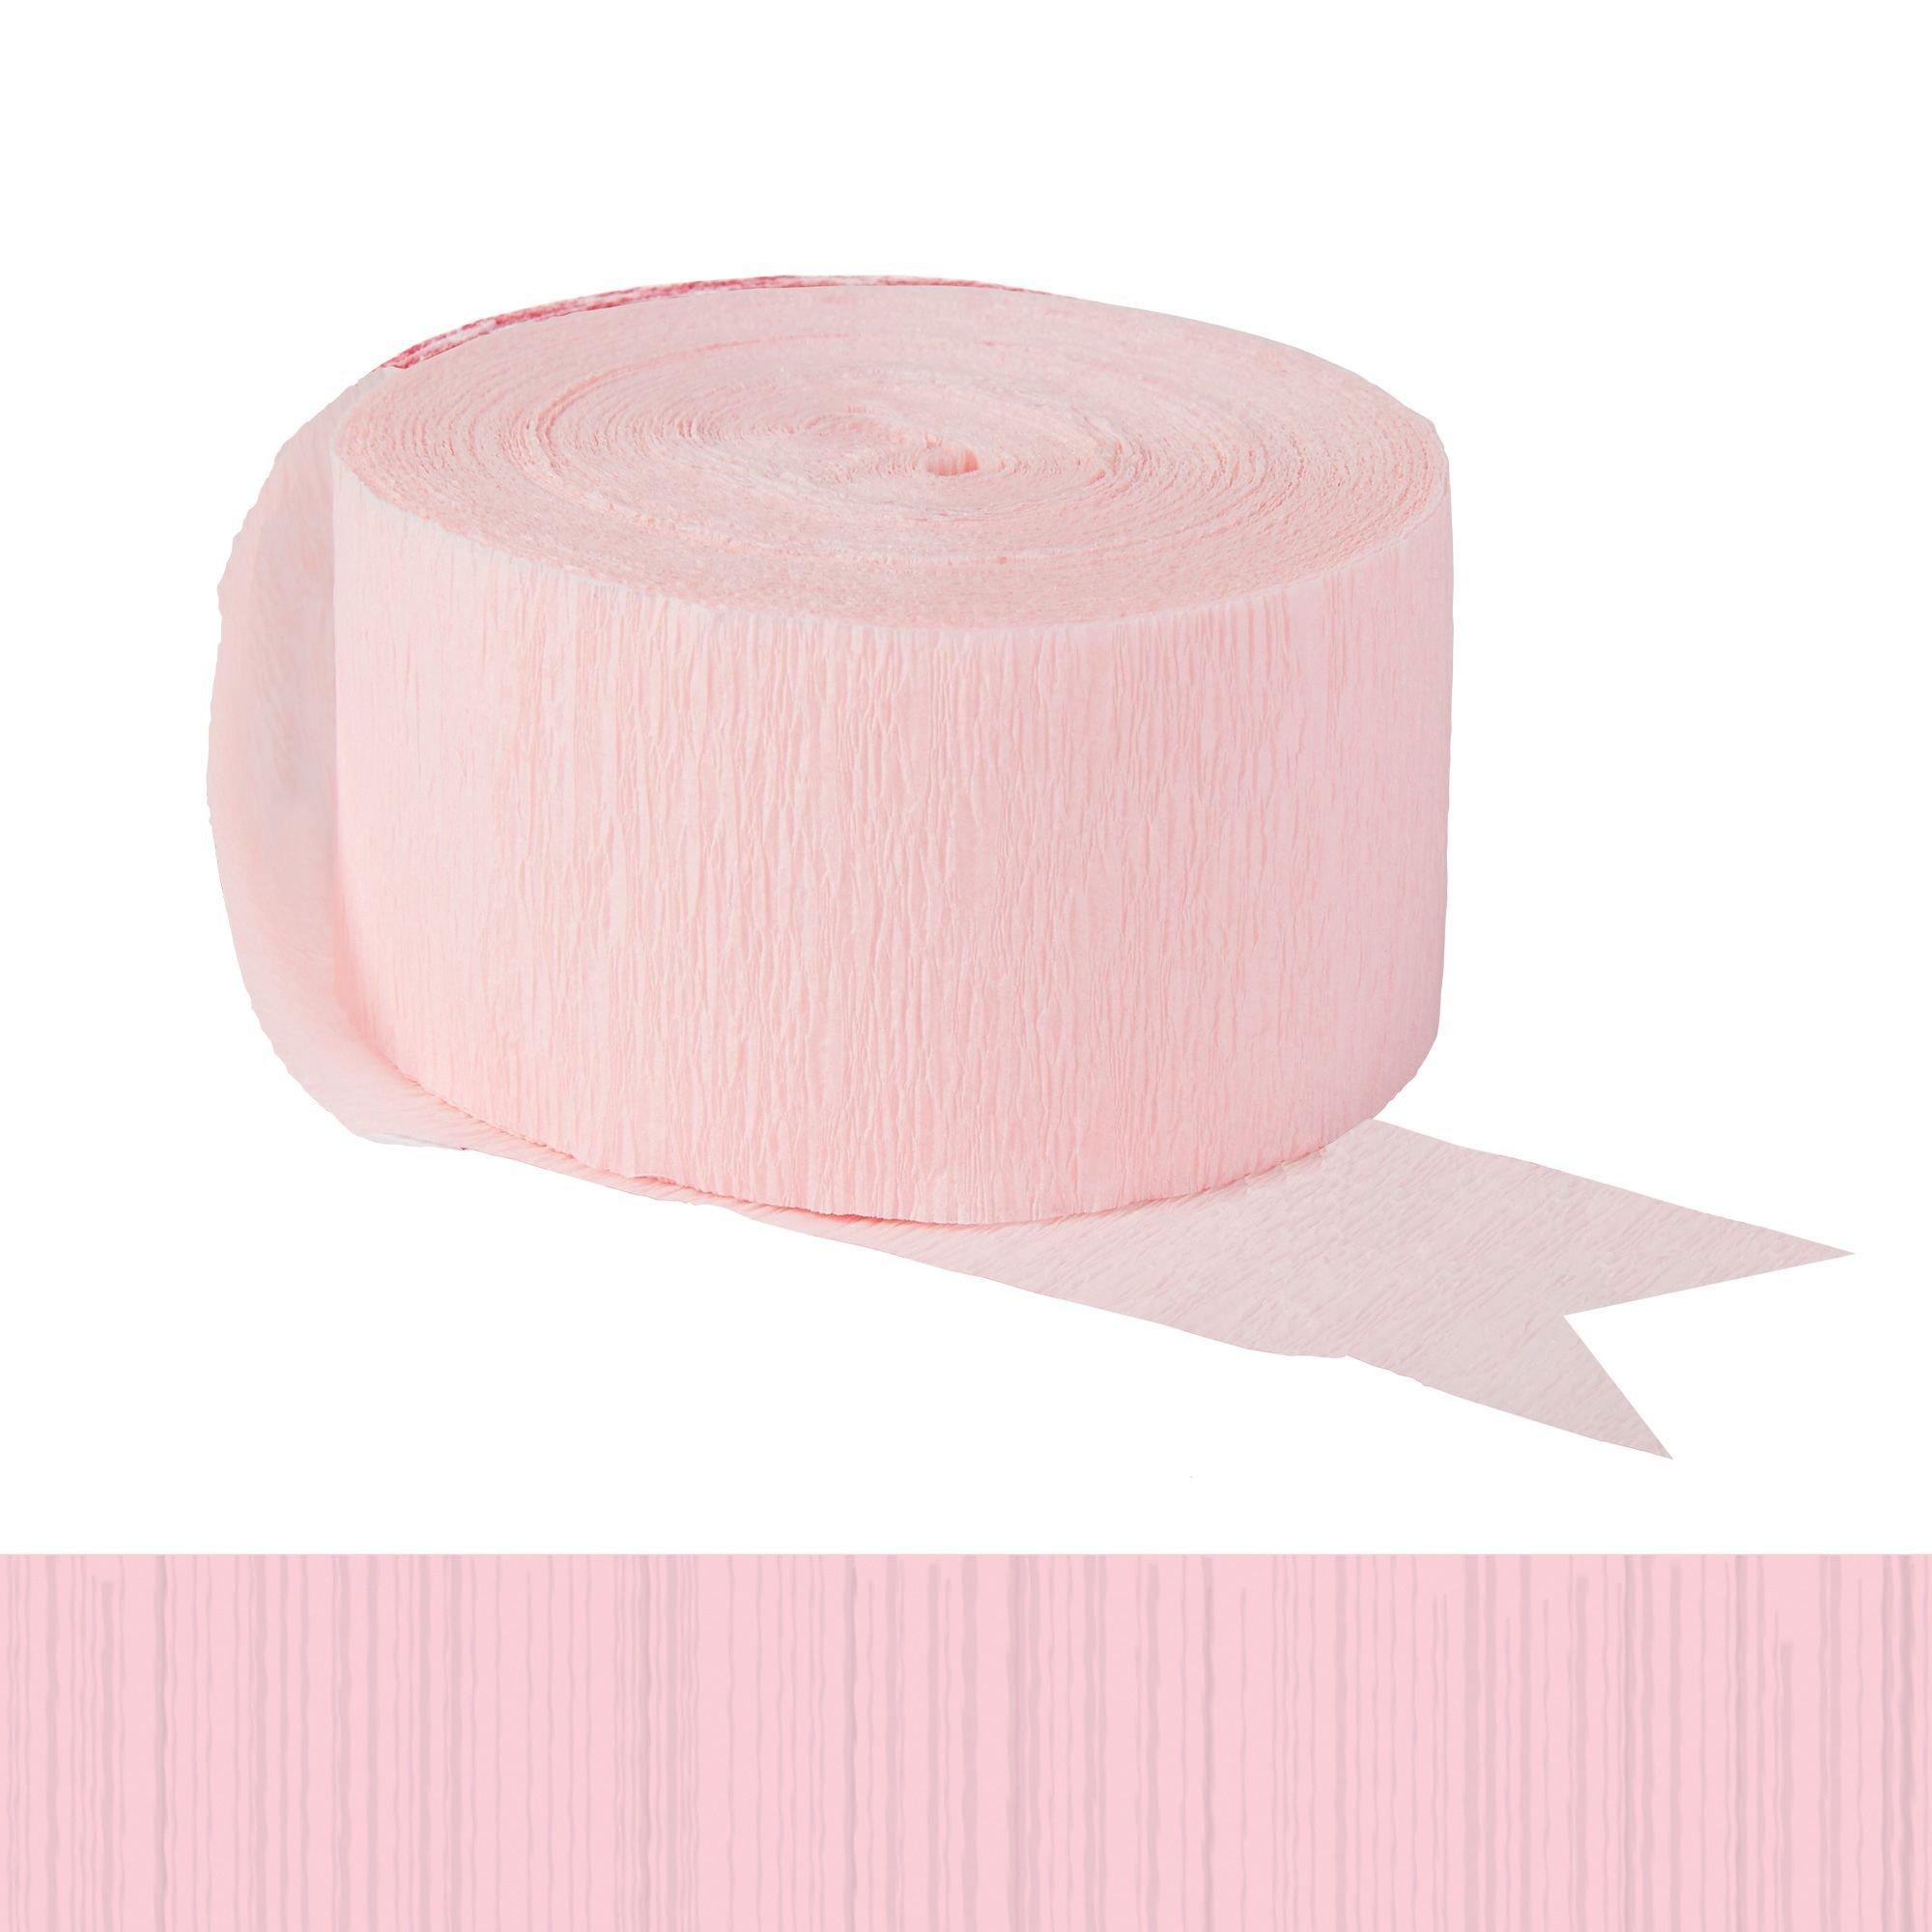 Pastel Pink Crepe Paper Party Streamer Roll, 81ft 